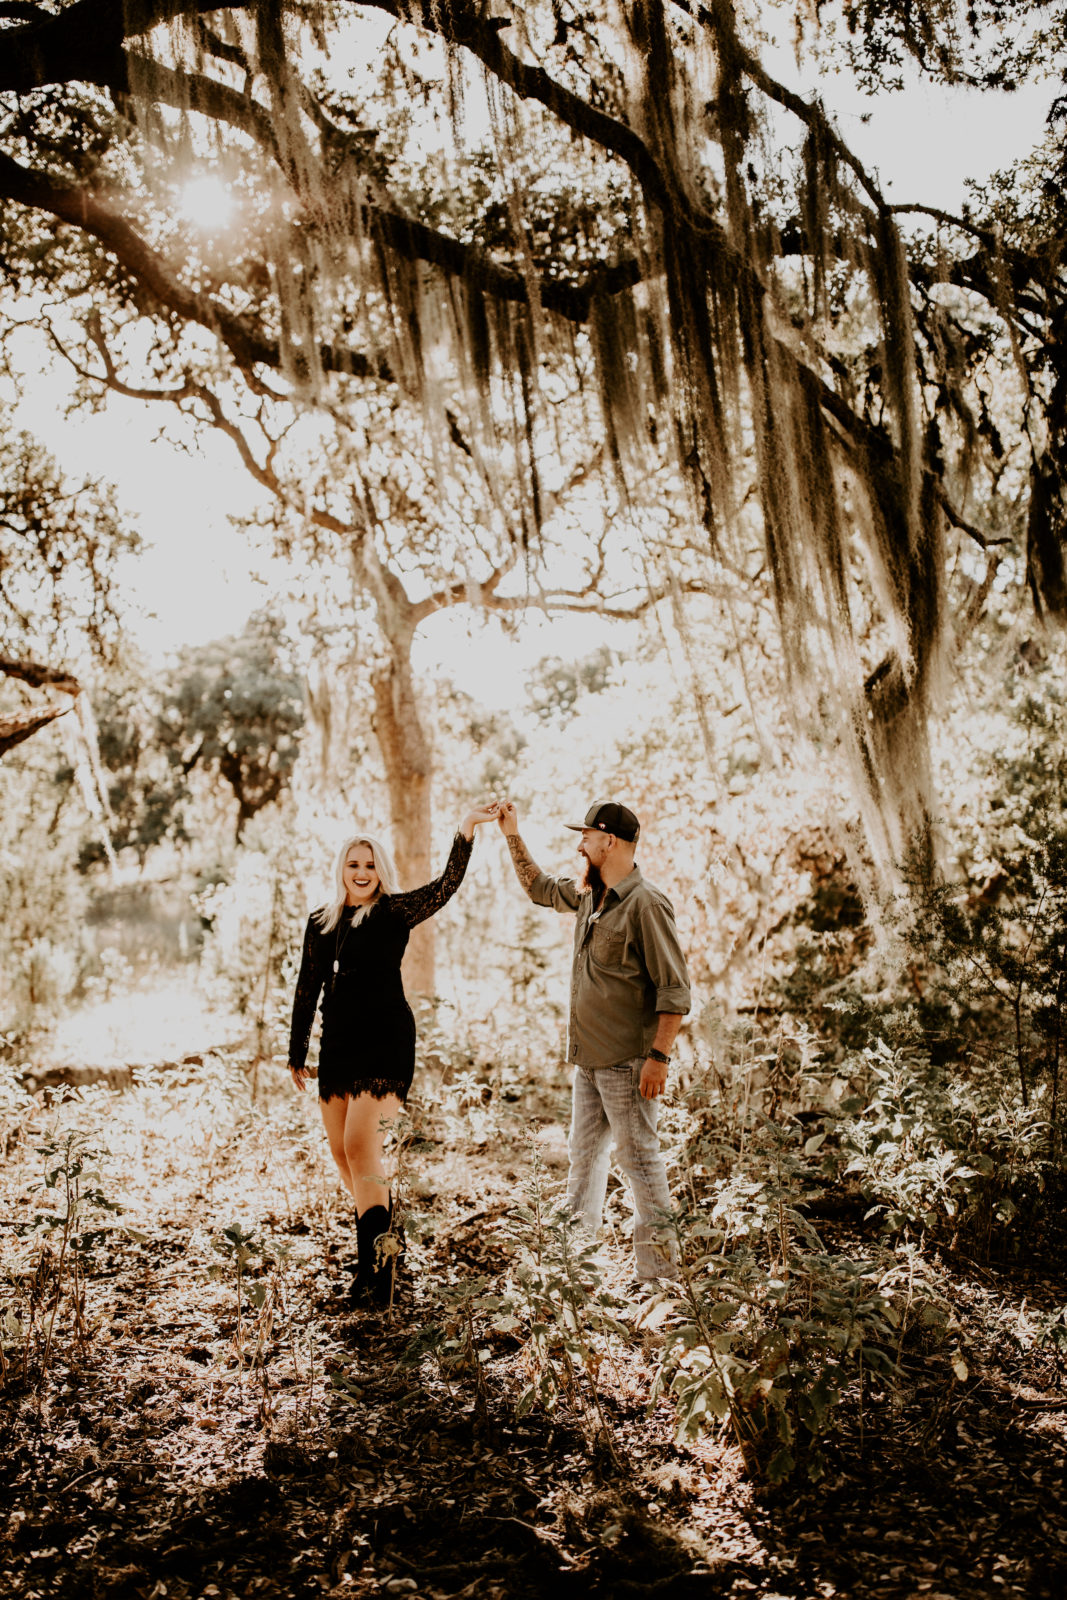 moody photo of man and woman dressed up dancing under the Texas Spanish moss